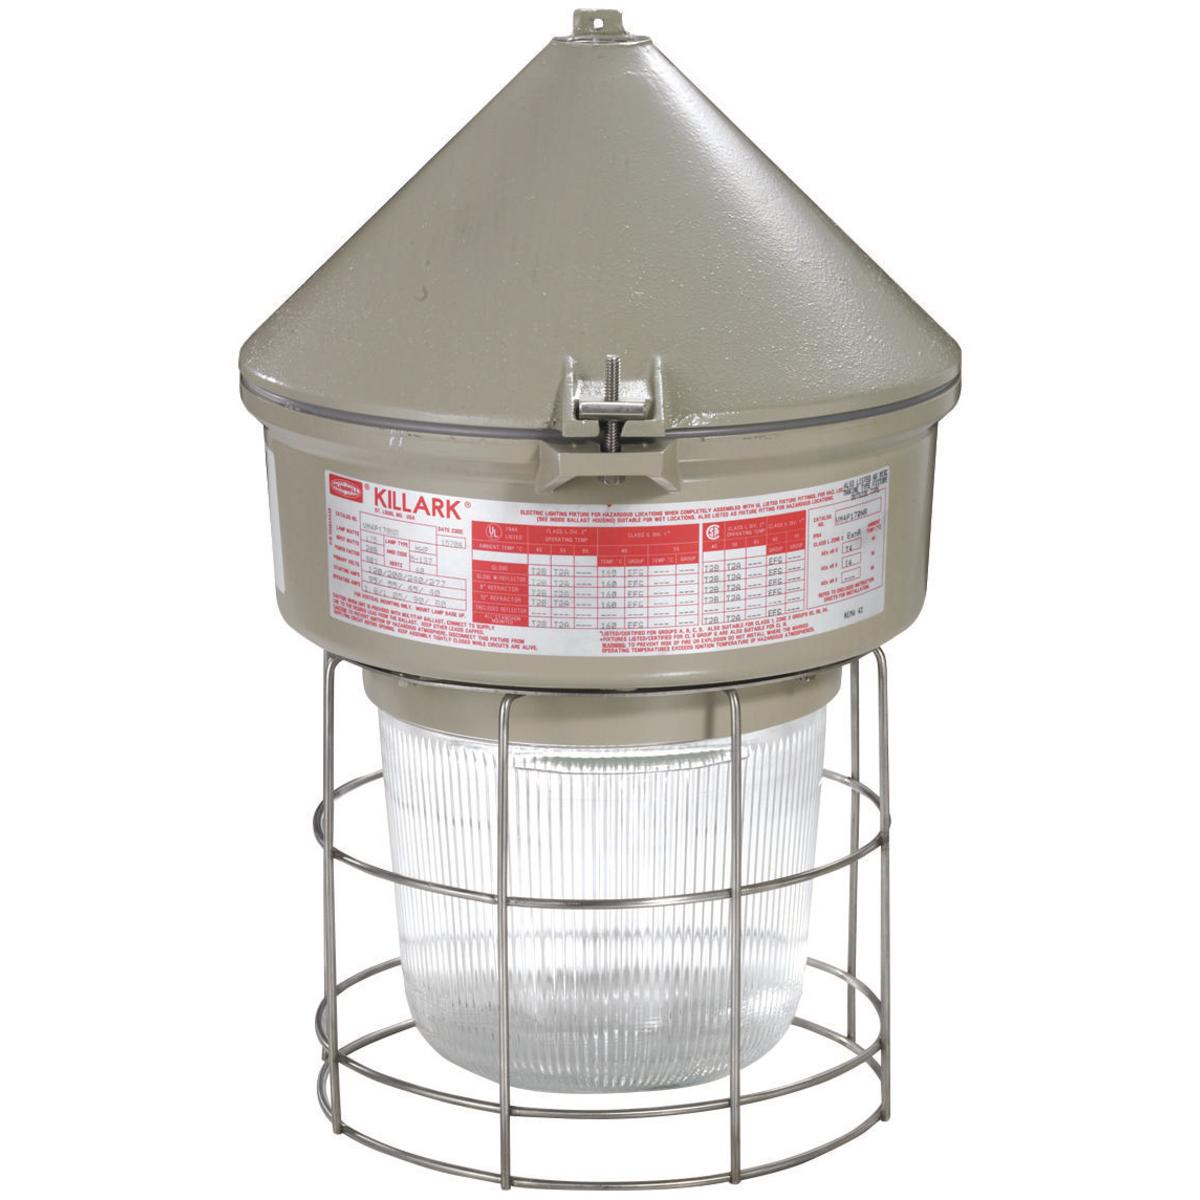 Hubbell VM4P175C2GLG VM4 Series - 175W Metal Halide 480V - 3/4" Cone Top - Globe and Guard  ; Ballast tank and splice box – corrosion resistant copper-free aluminum alloy with baked powder epoxy/polyester finish, electrostatically applied for complete, uniform corrosion prote